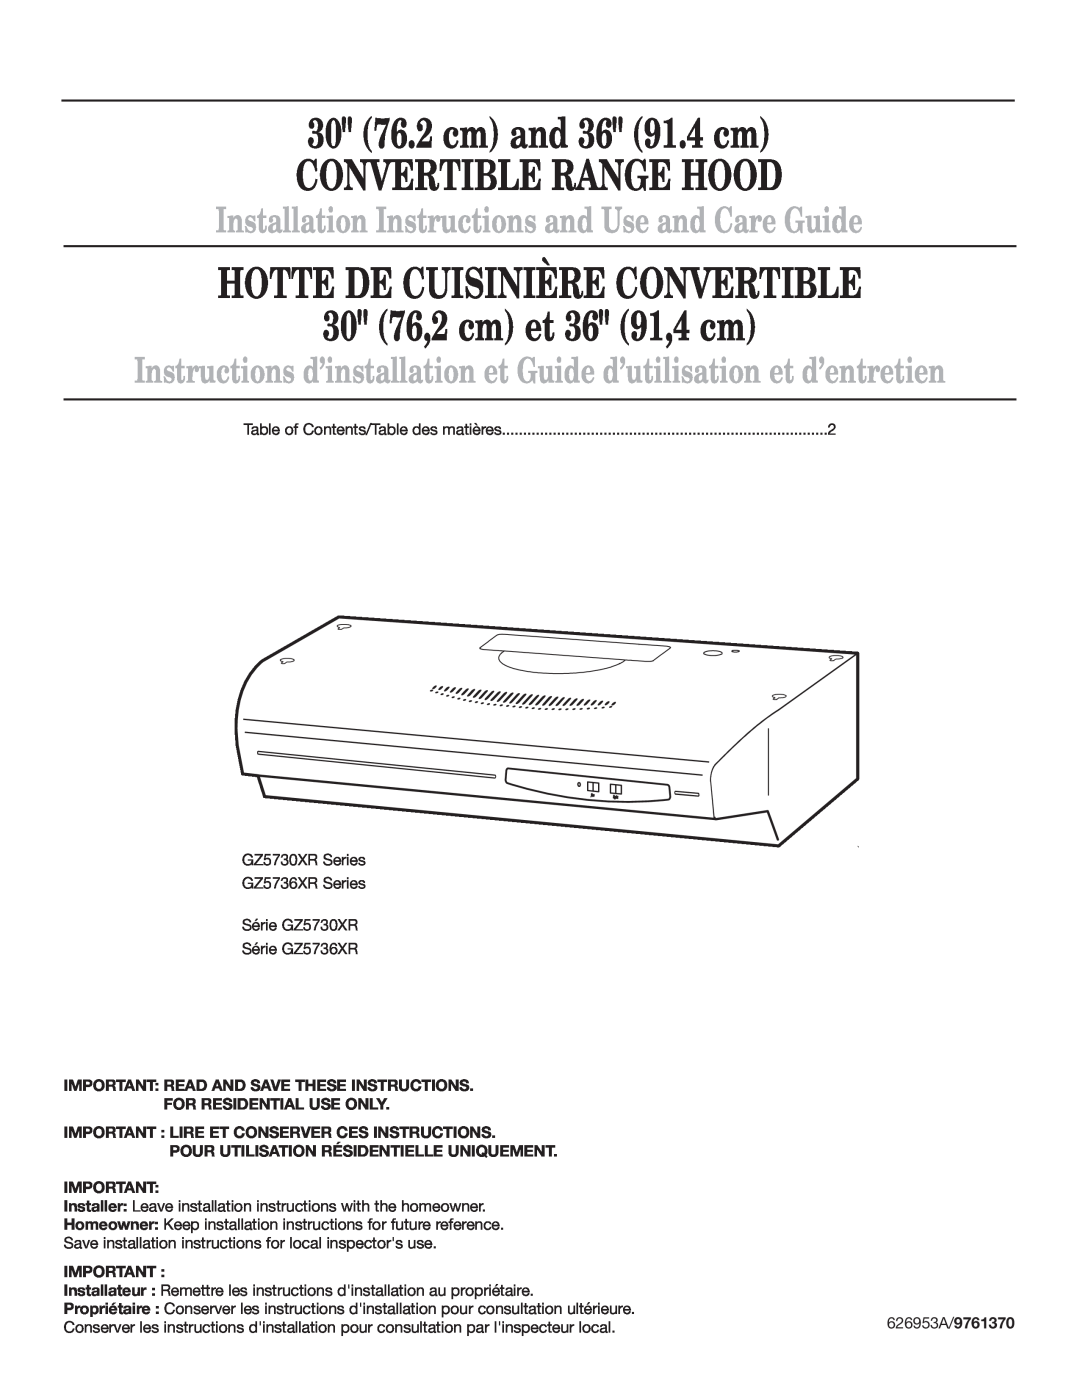 Whirlpool GZ5736XR installation instructions Important Read And Save These Instructions, For Residential Use Only 